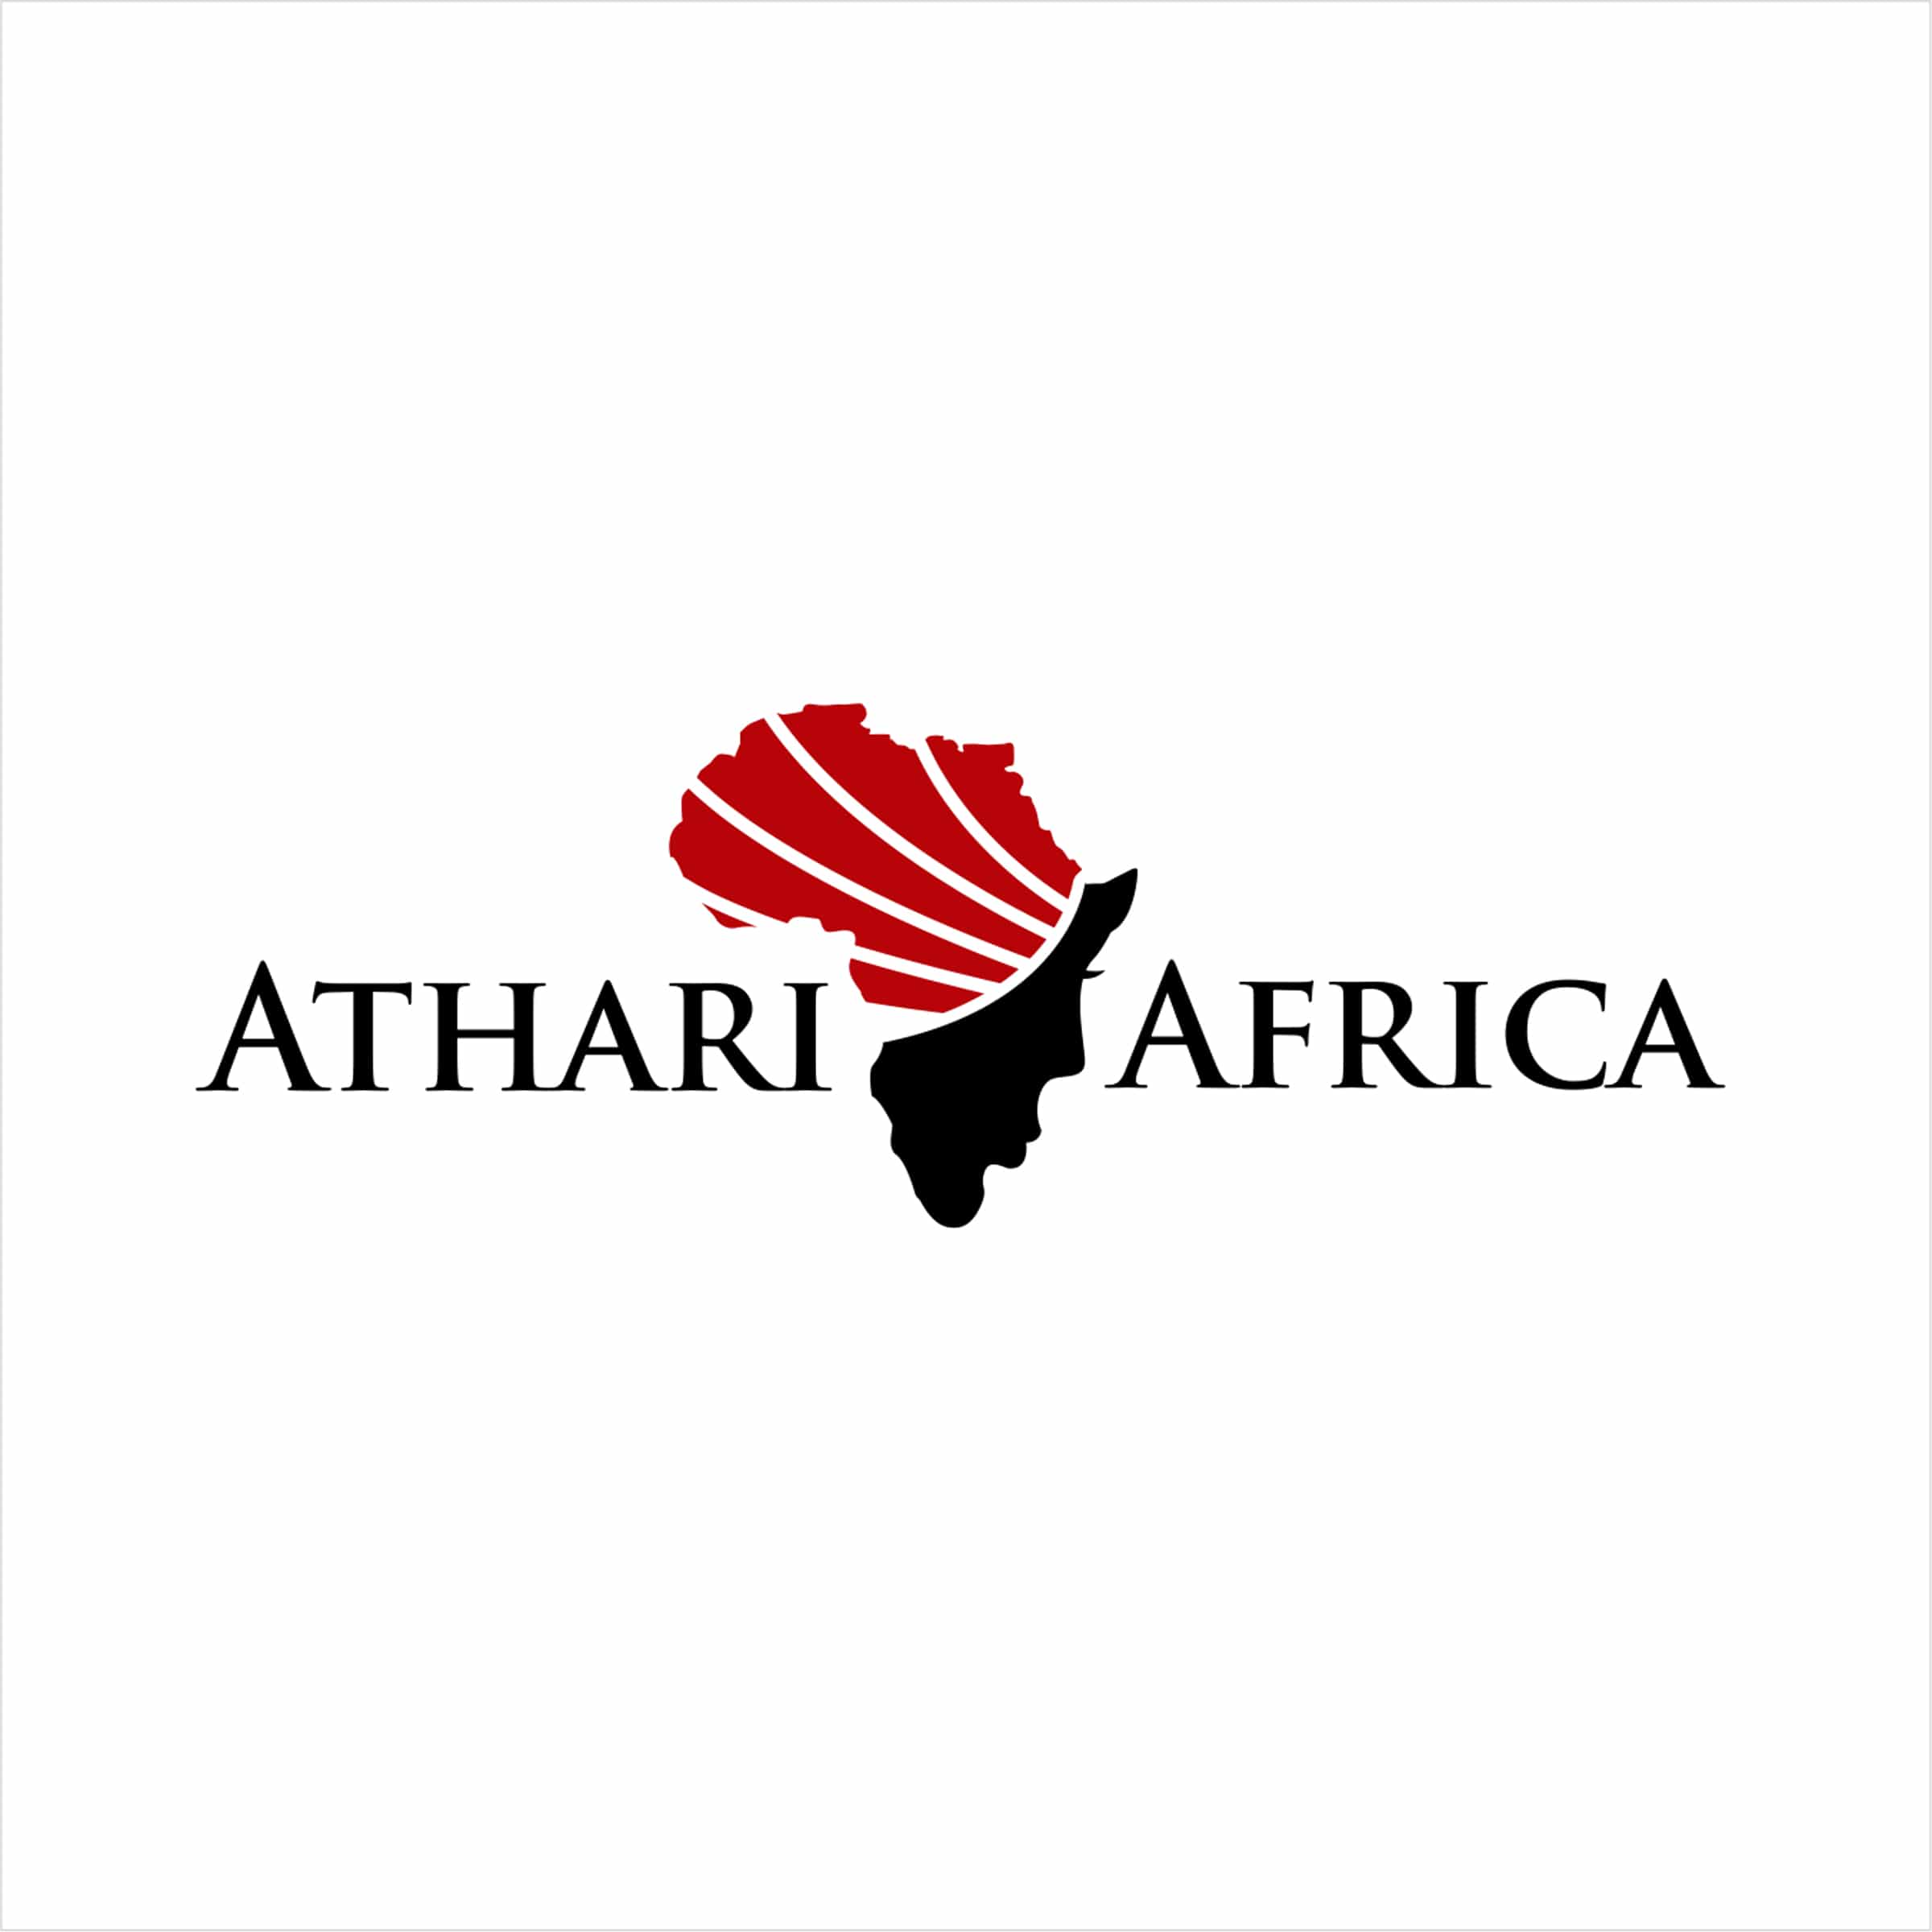 ICONIC LOGO DESIGN FOR AN AFRICAN BUSINESS